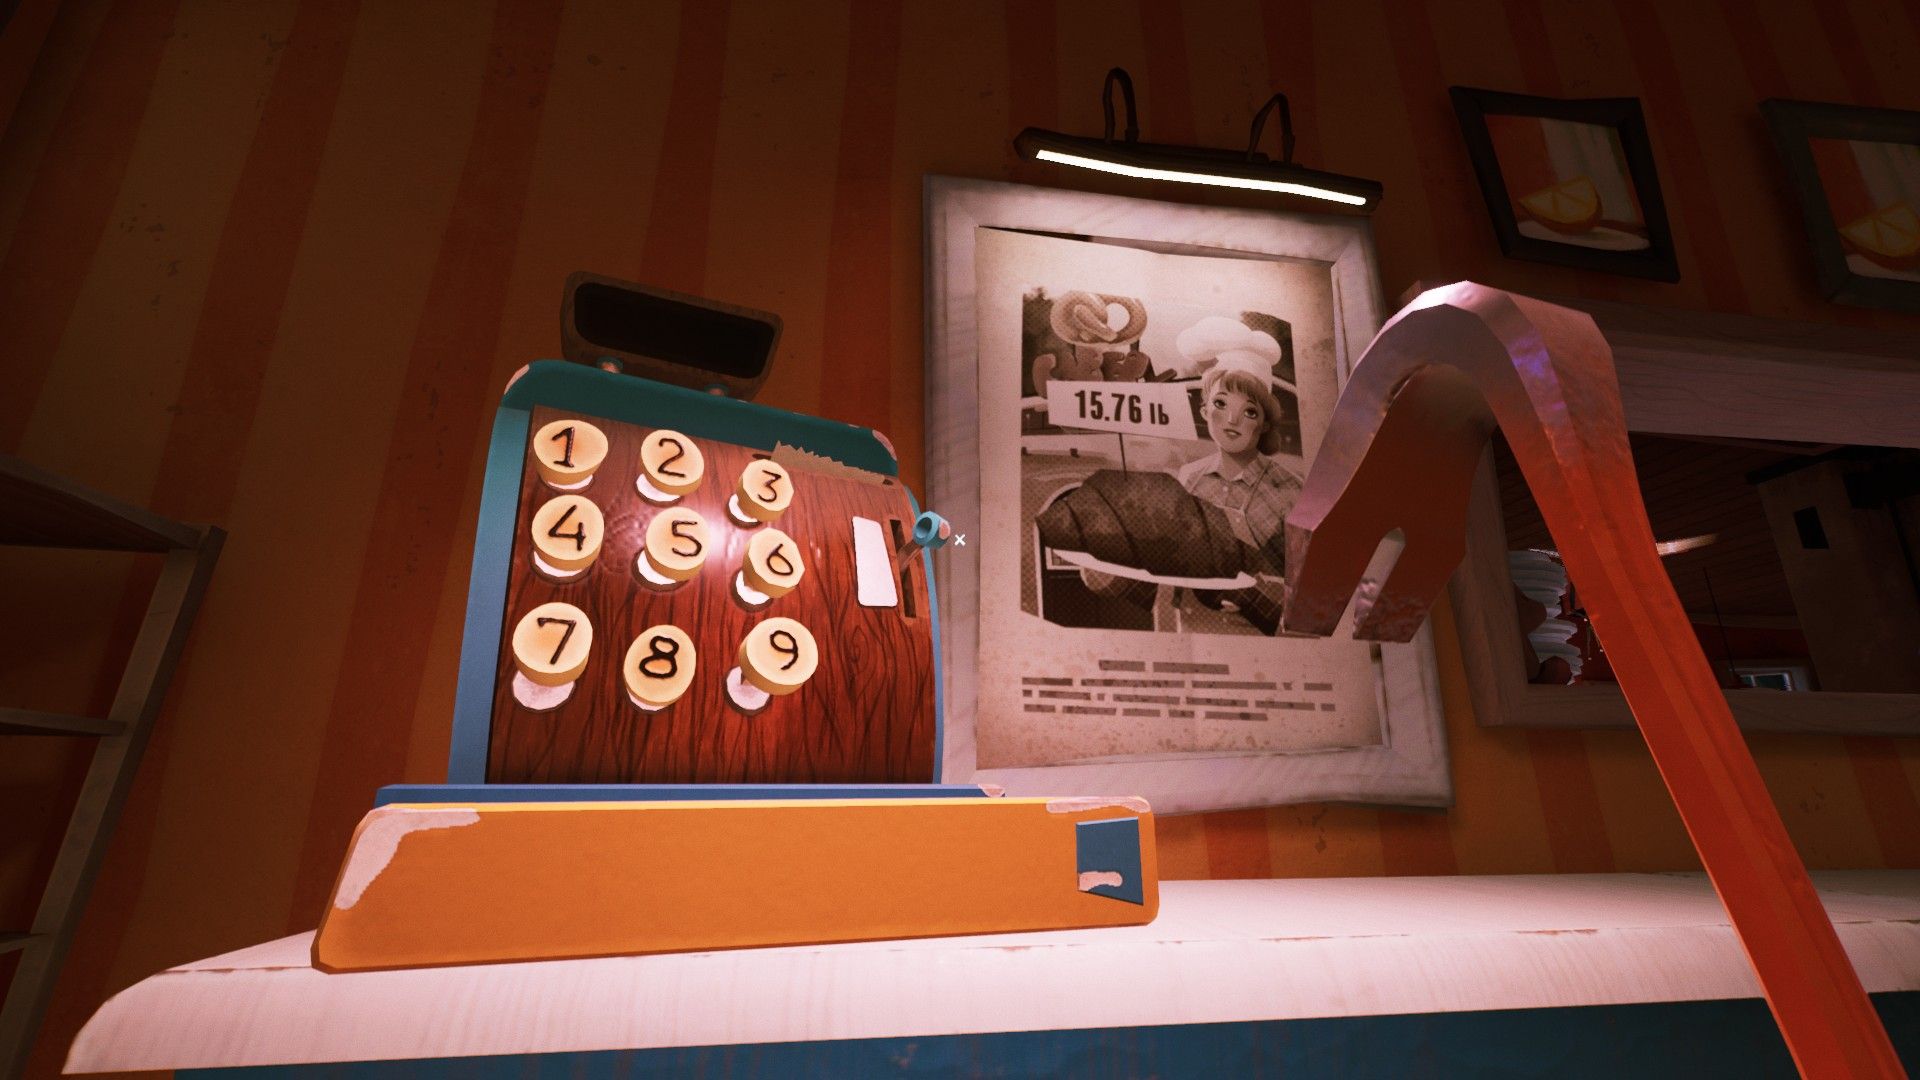 The Bakery cash register with the code printed on the poster next to it in Hello Neighbor 2